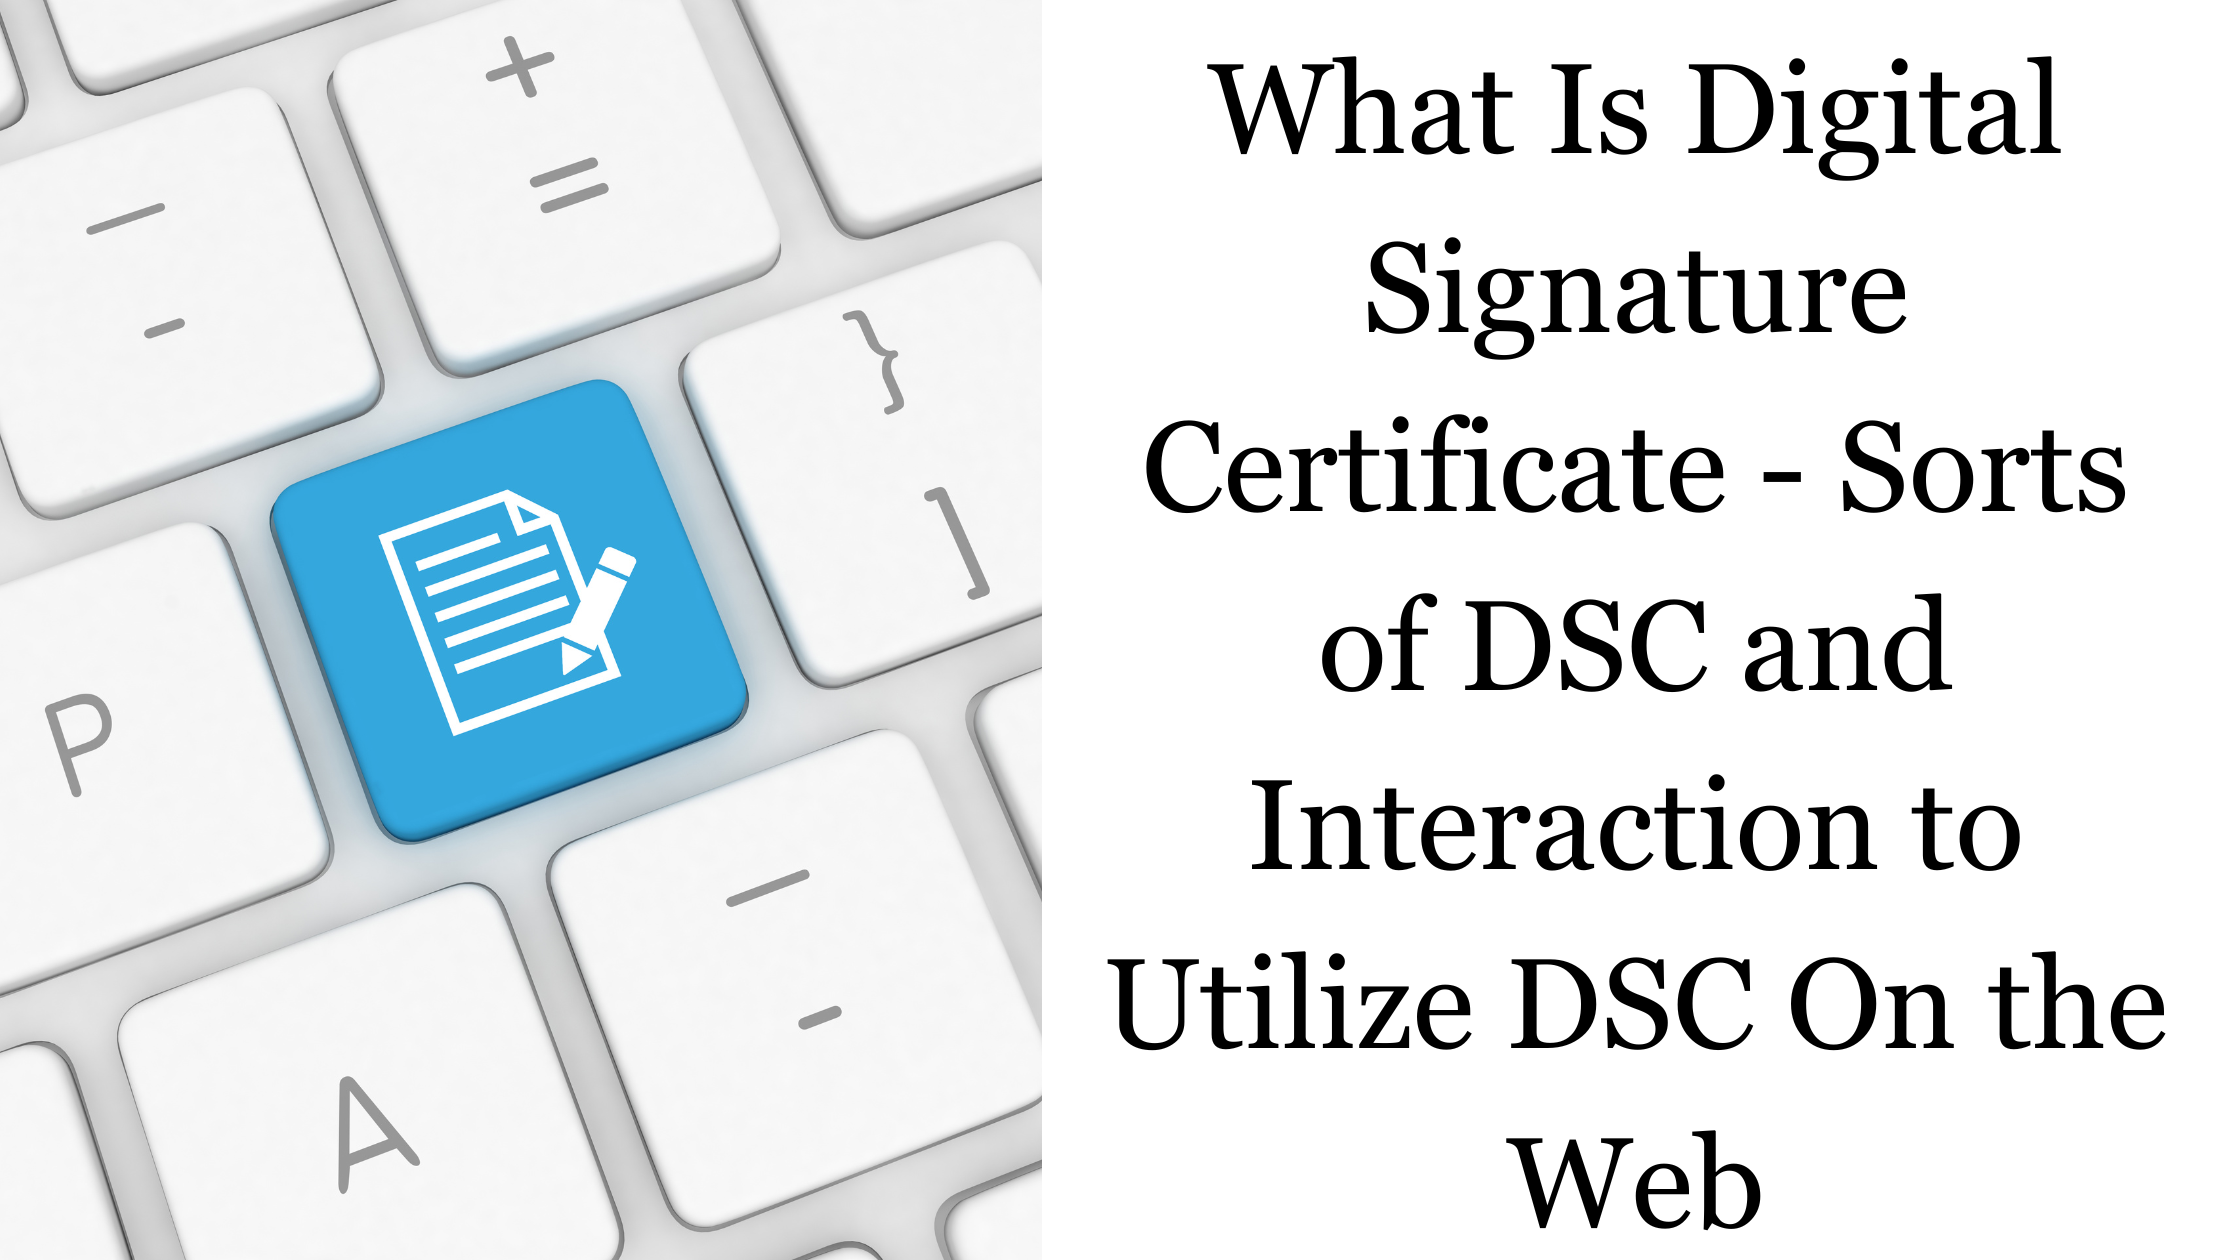 What Is Digital Signature Certificate - Sorts of DSC and Interaction to Utilize DSC On the Web